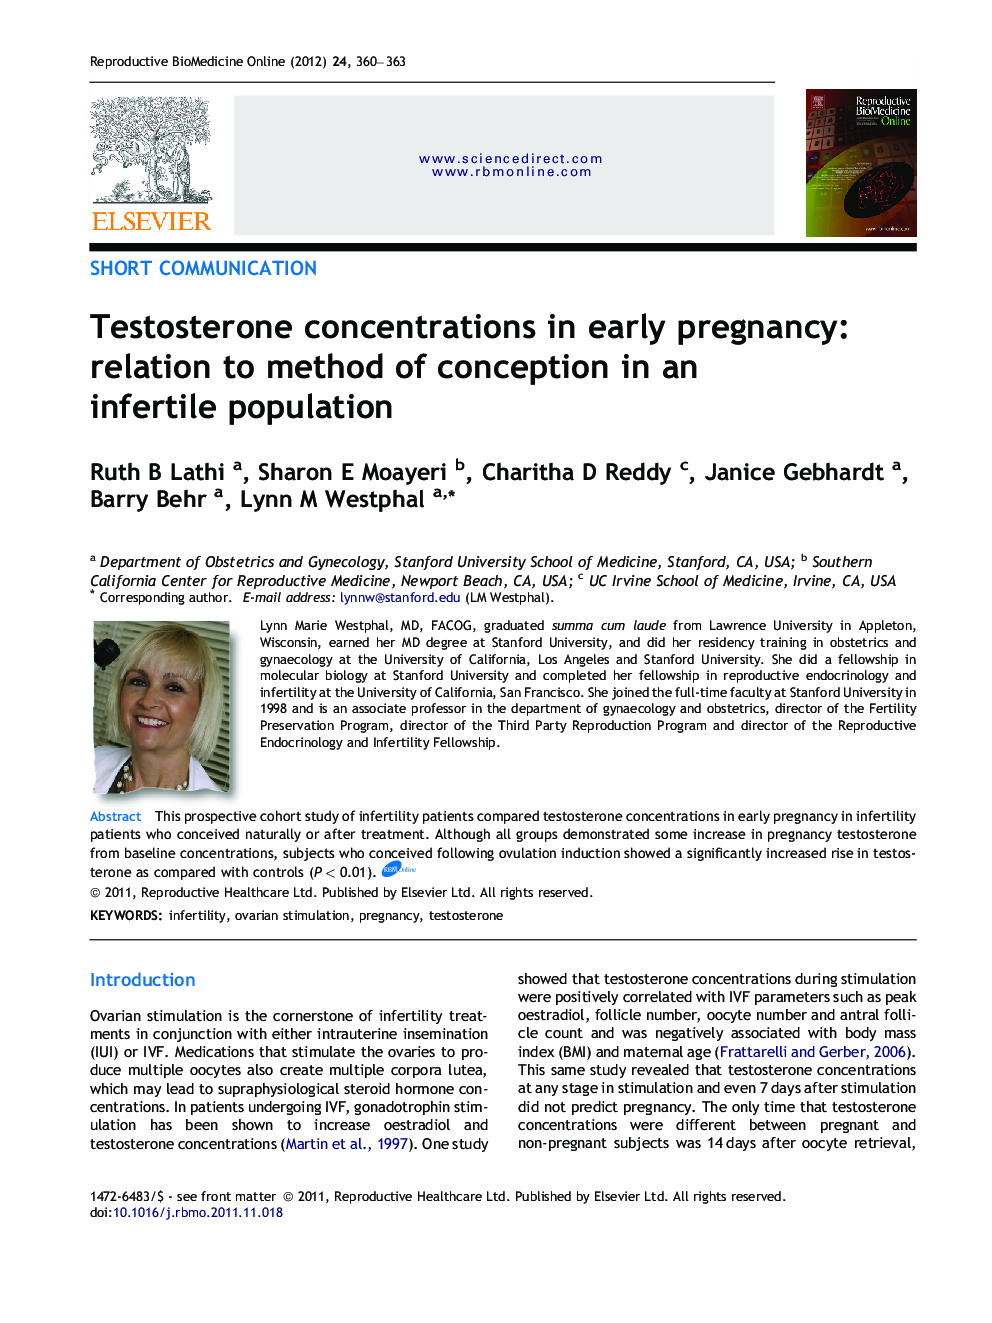 Testosterone concentrations in early pregnancy: relation to method of conception in an infertile population 